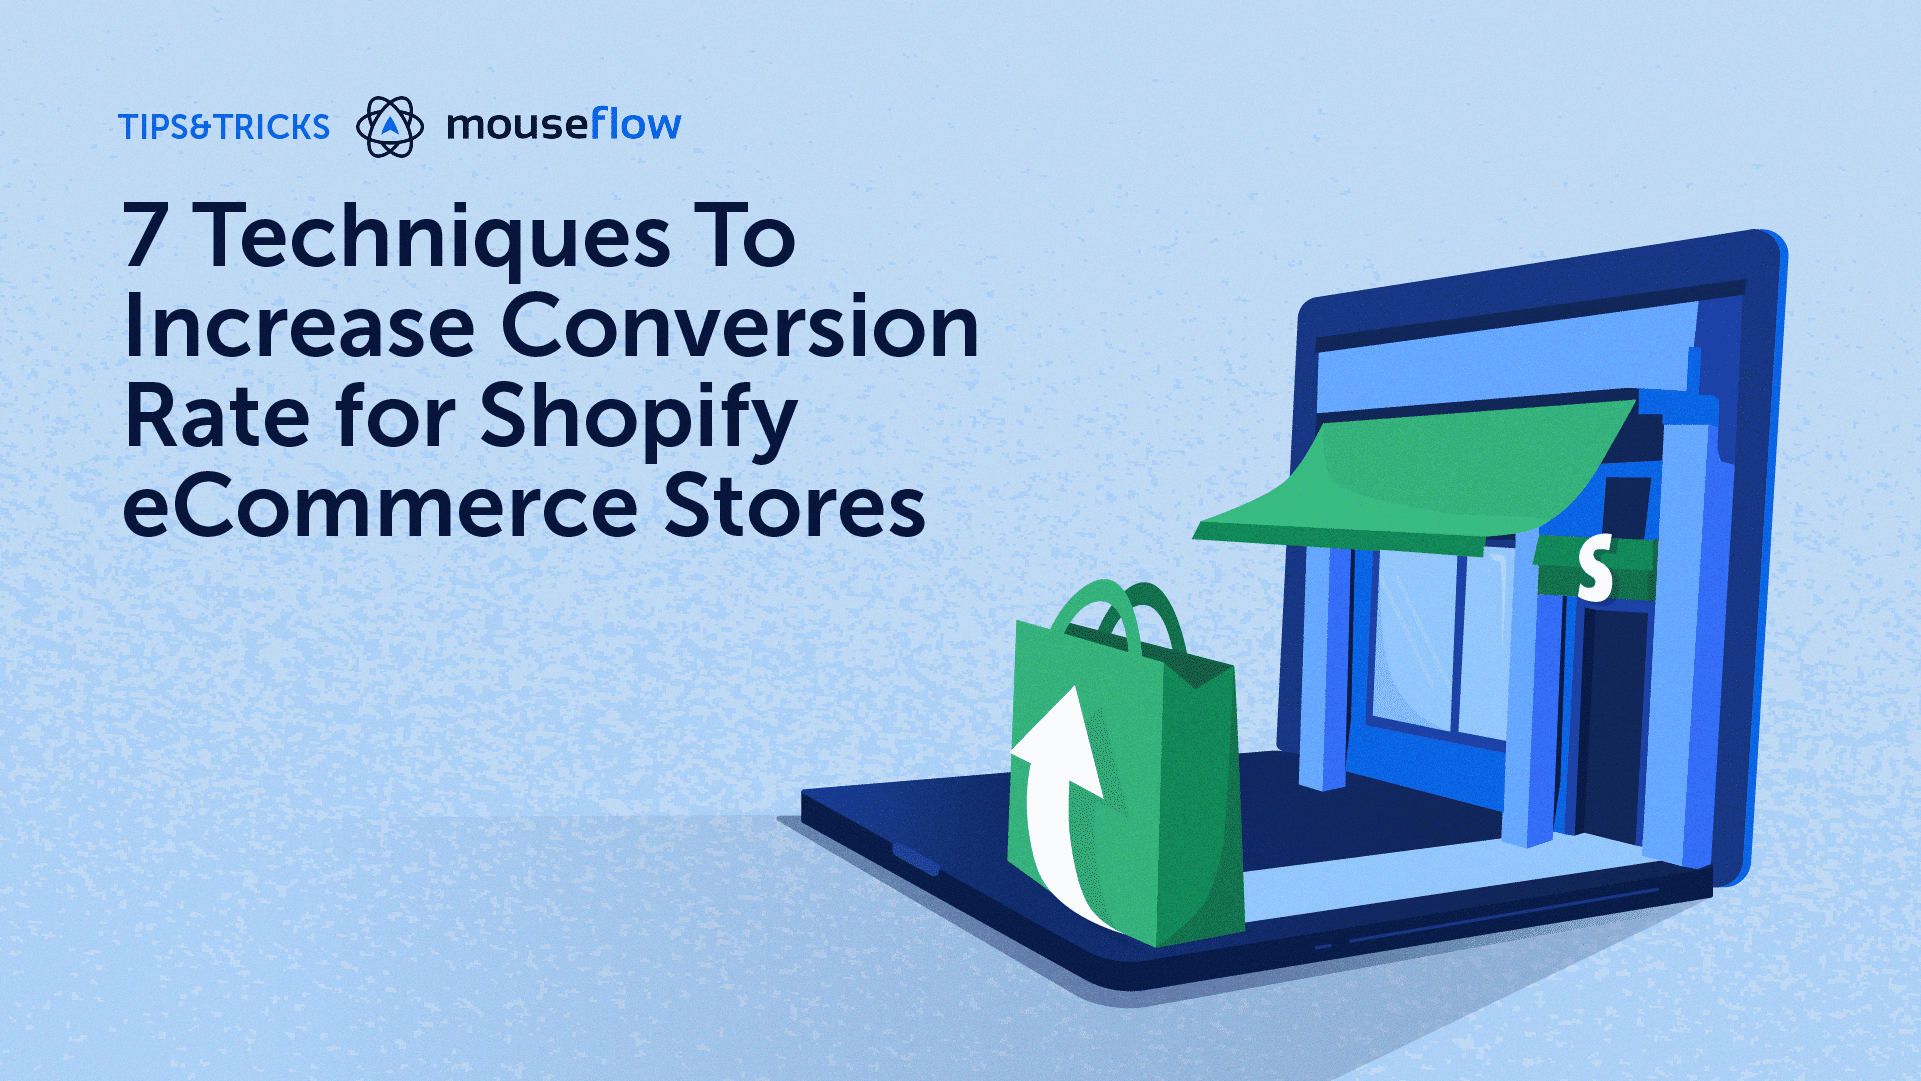 7 Techniques To Increase Conversion Rate for Shopify eCommerce Stores